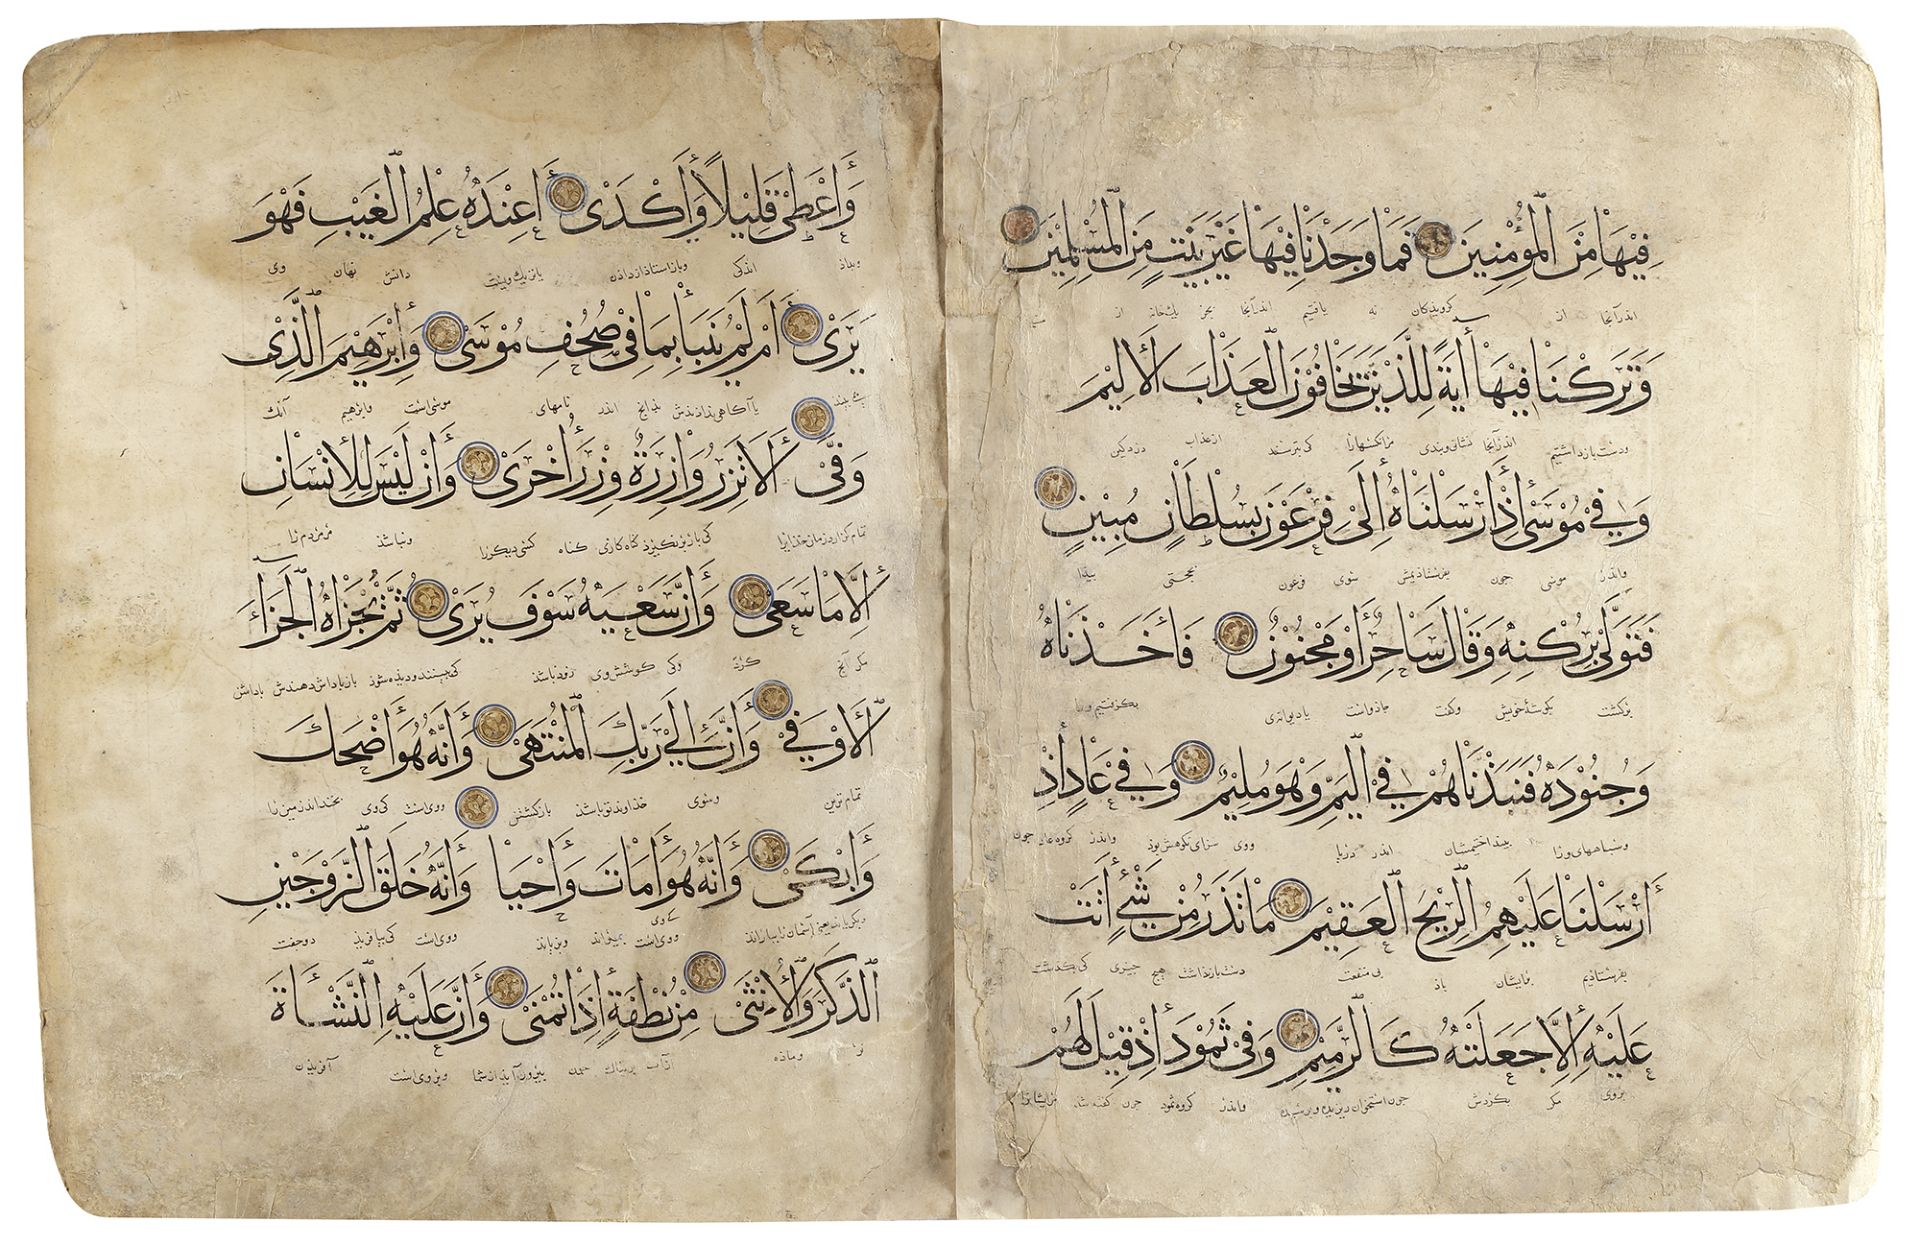 TWO LARGE MAMLUK QURAN PAGES, EGYPT, 13TH CENTURY - Image 2 of 3